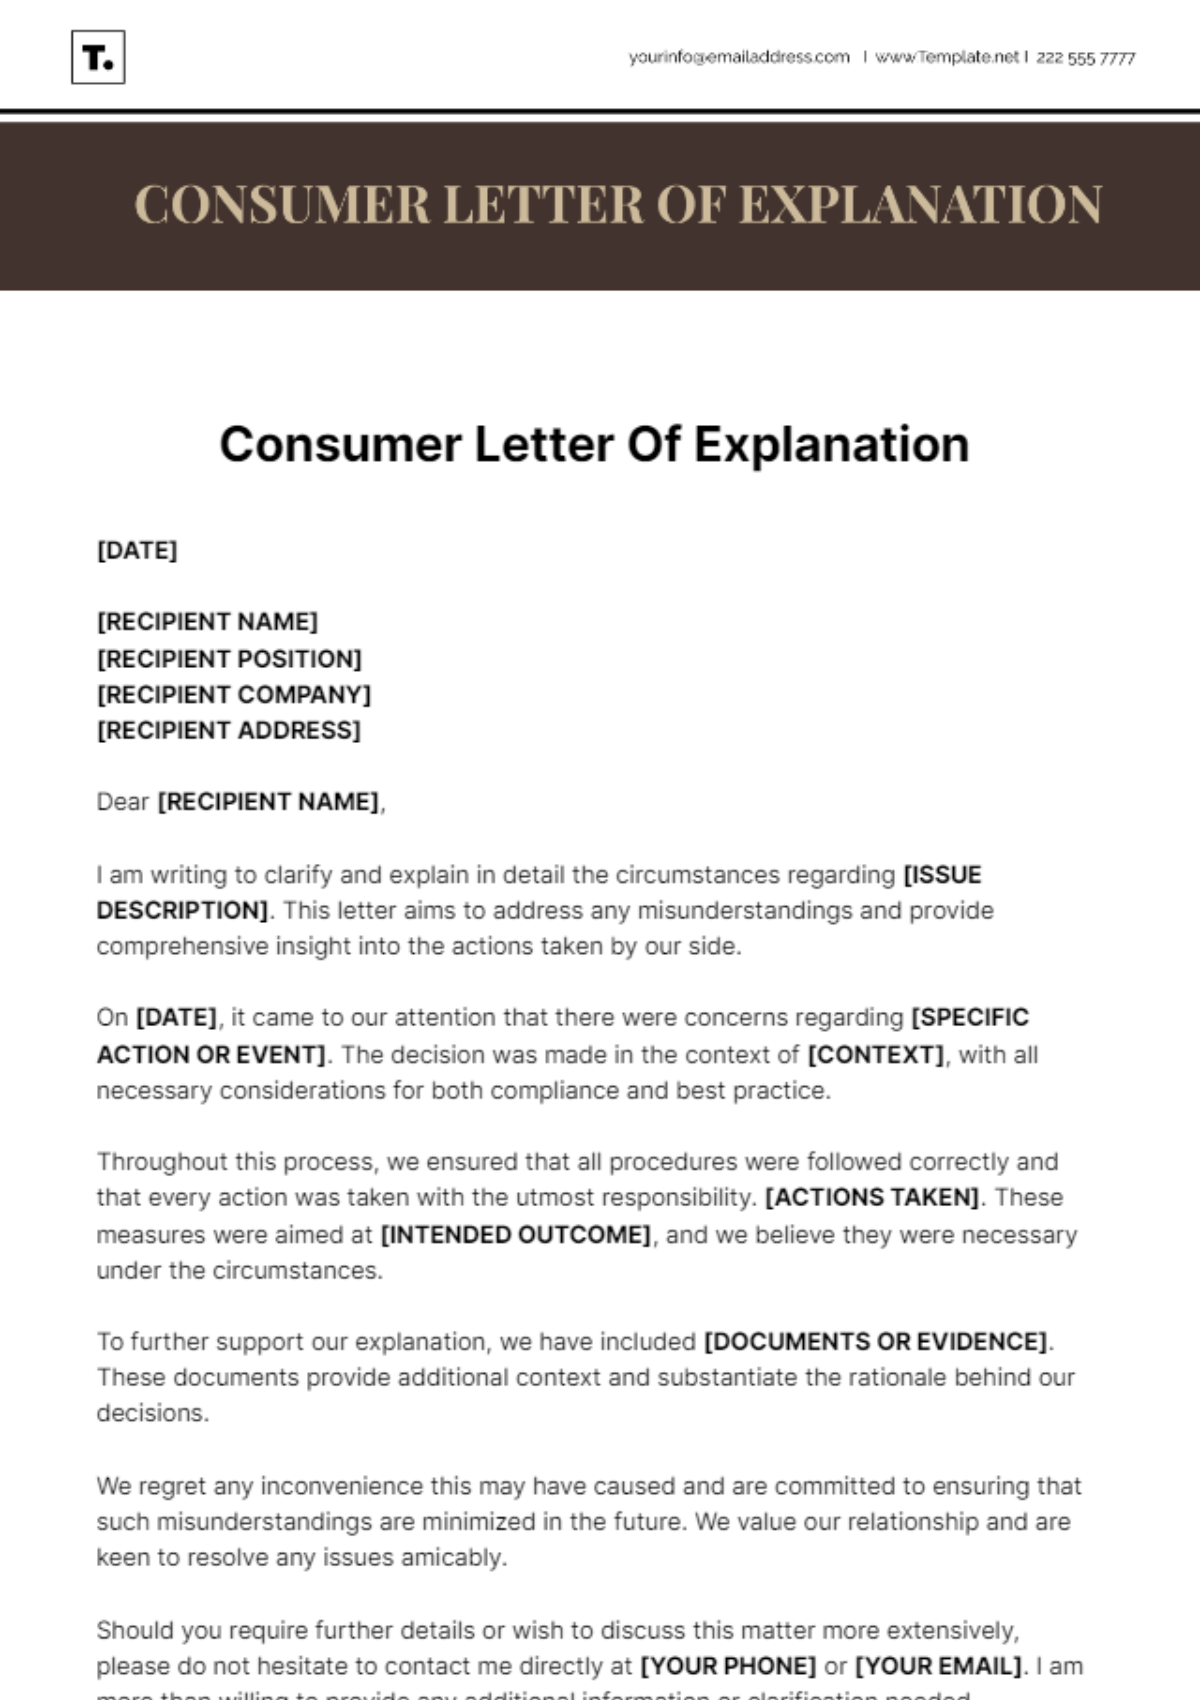 Consumer Letter Of Explanation Template